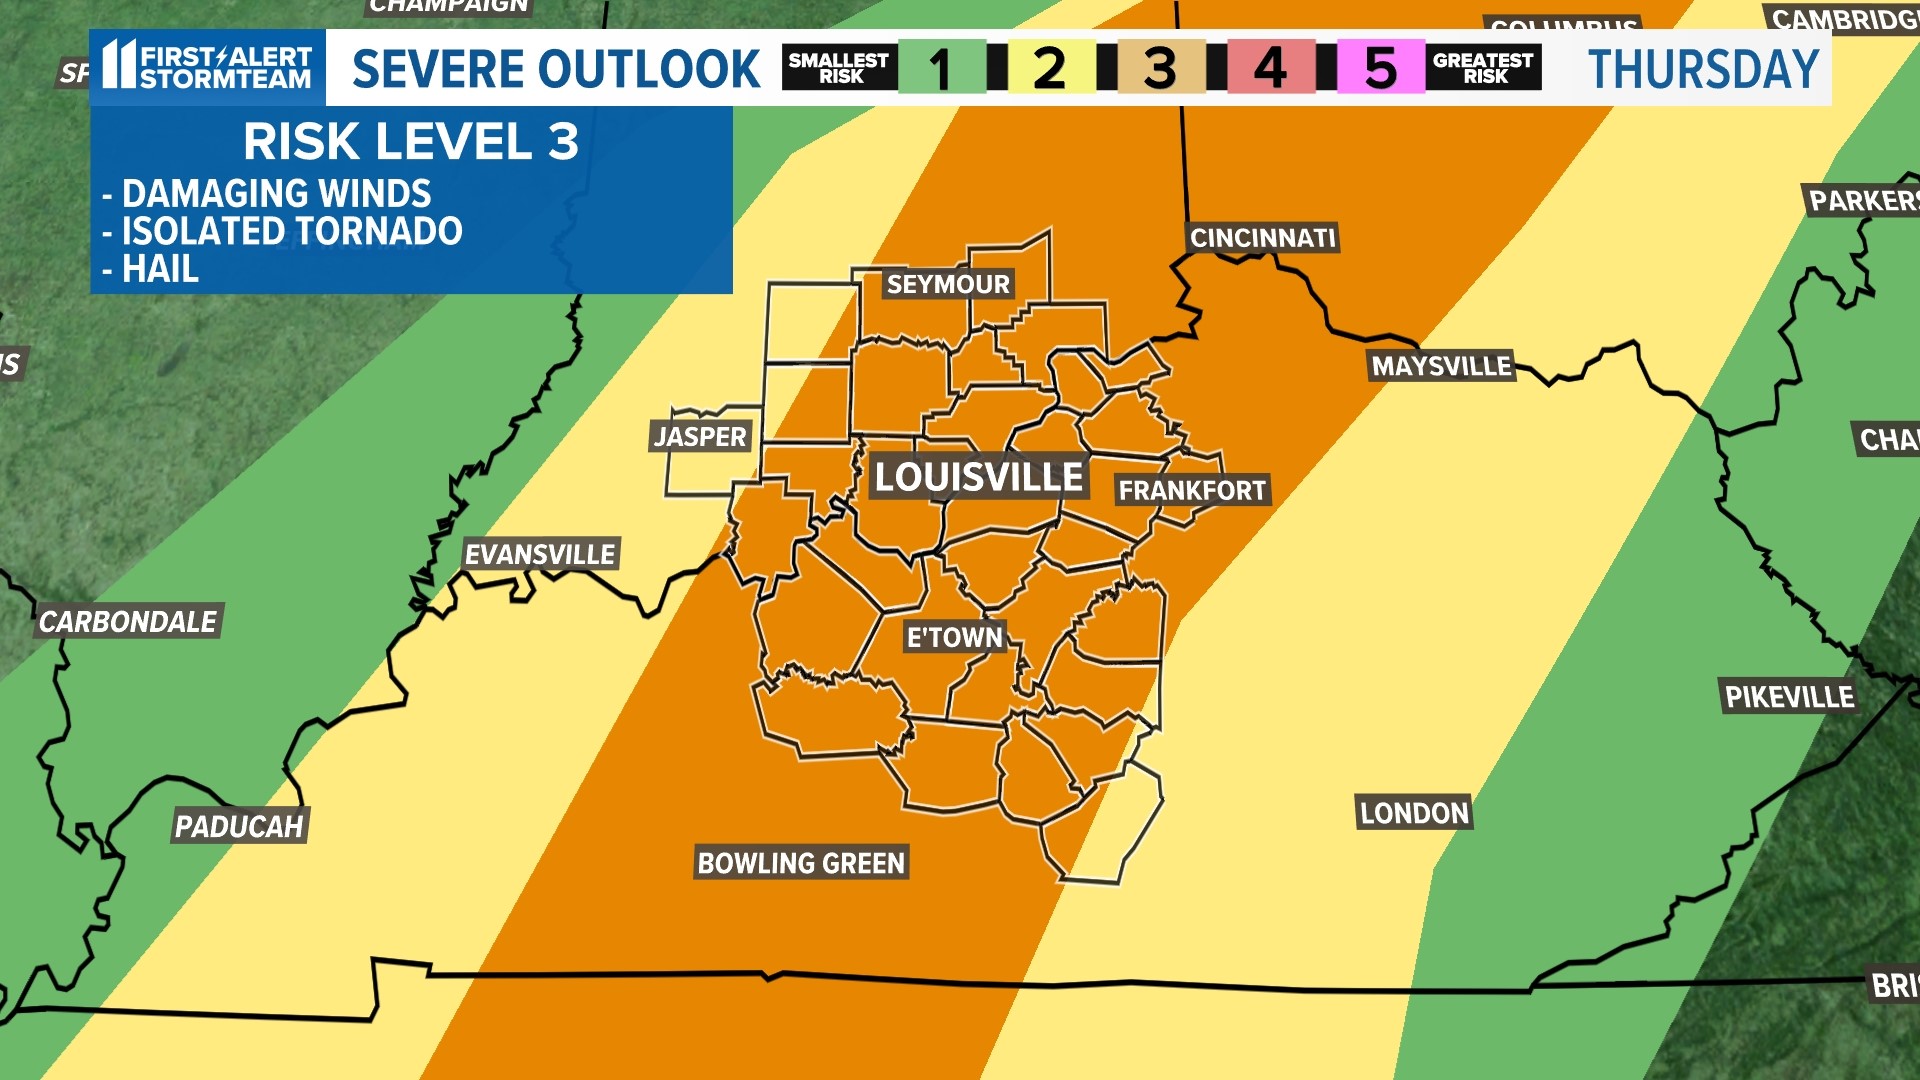 Severe thunderstorms expected in Kentuckiana Thursday morning and afternoon. Here are the main threats.